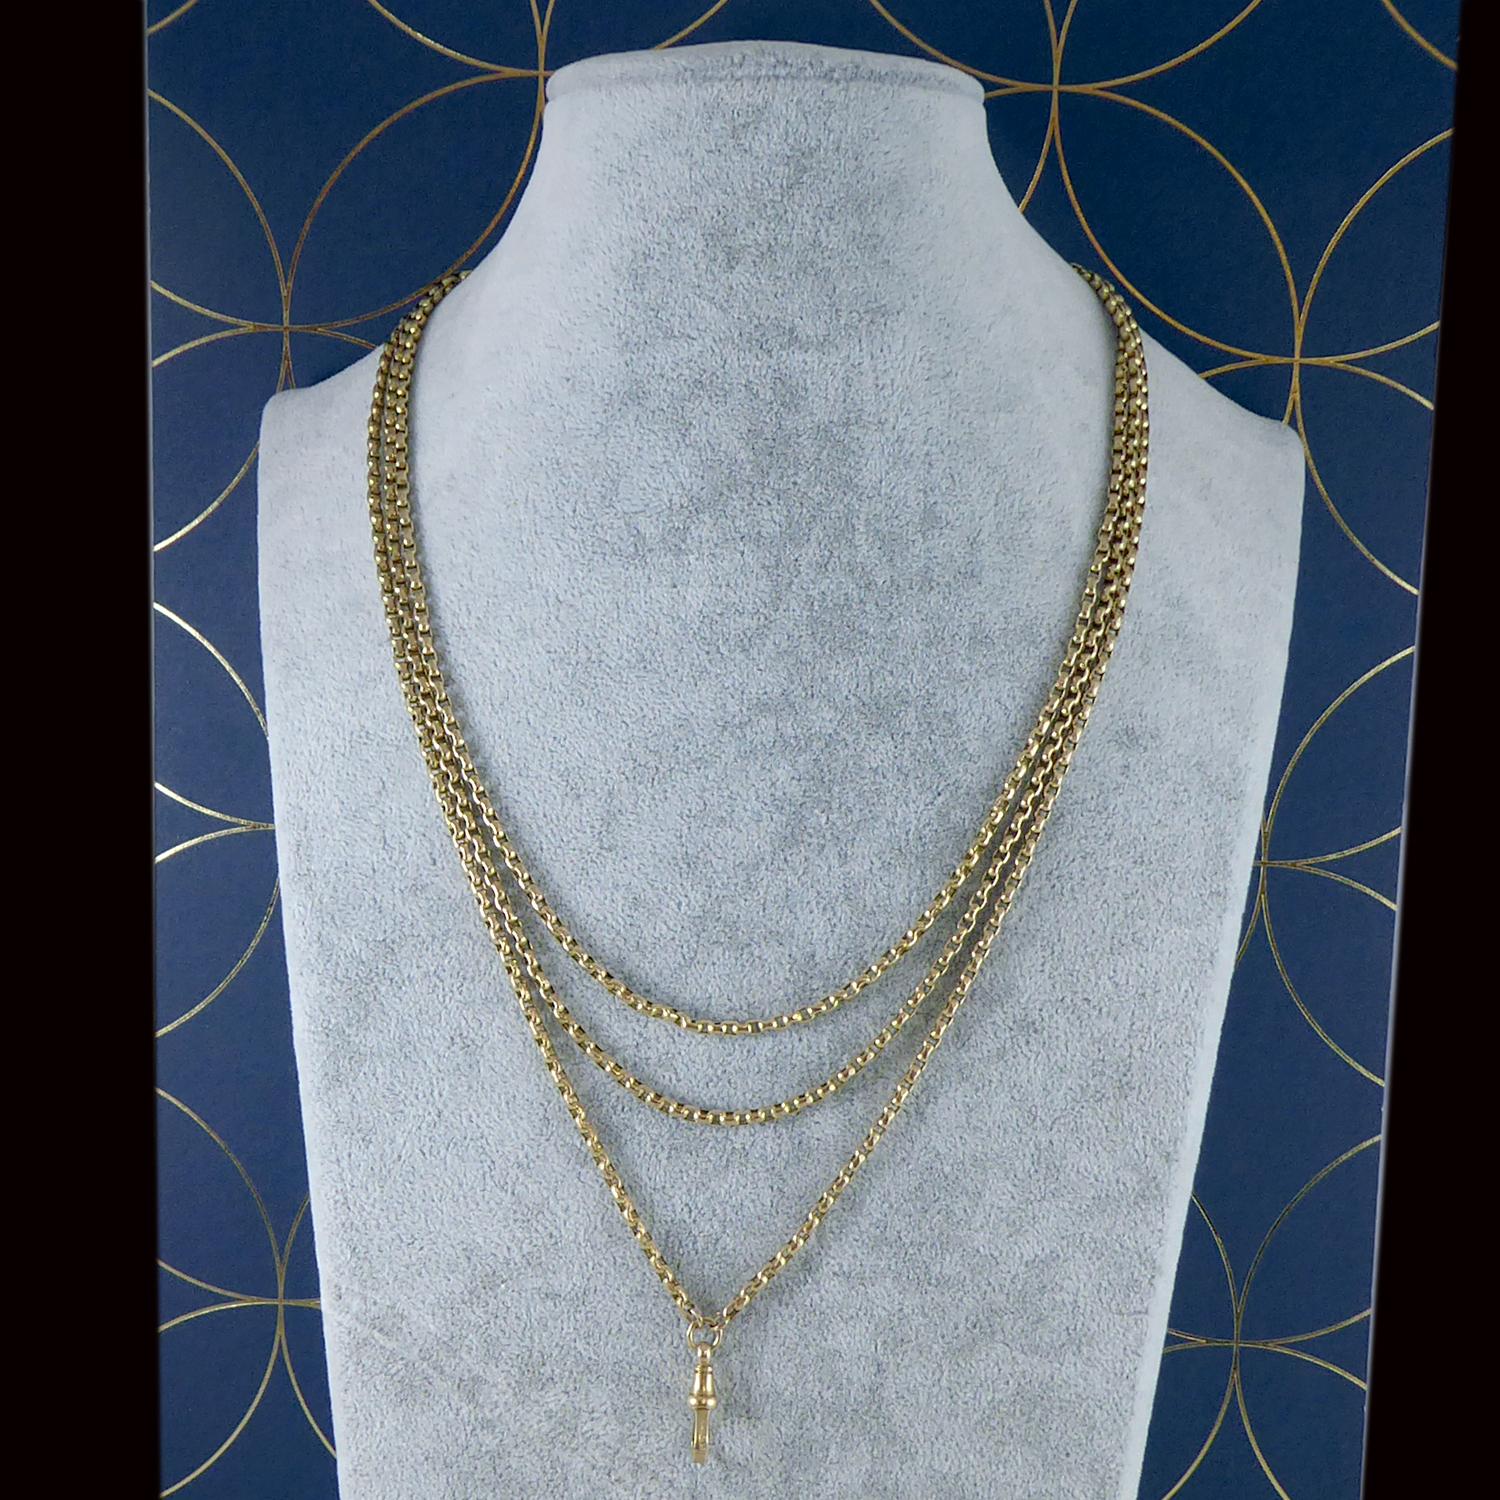 An antique gold long watch chain from the Victorian era.  Comprising small, oval faceted, belcher links in 9ct yellow gold.  The chain measures approx. 61 inches long and is fitted with a swivel clip at the centre point to which pendants of your